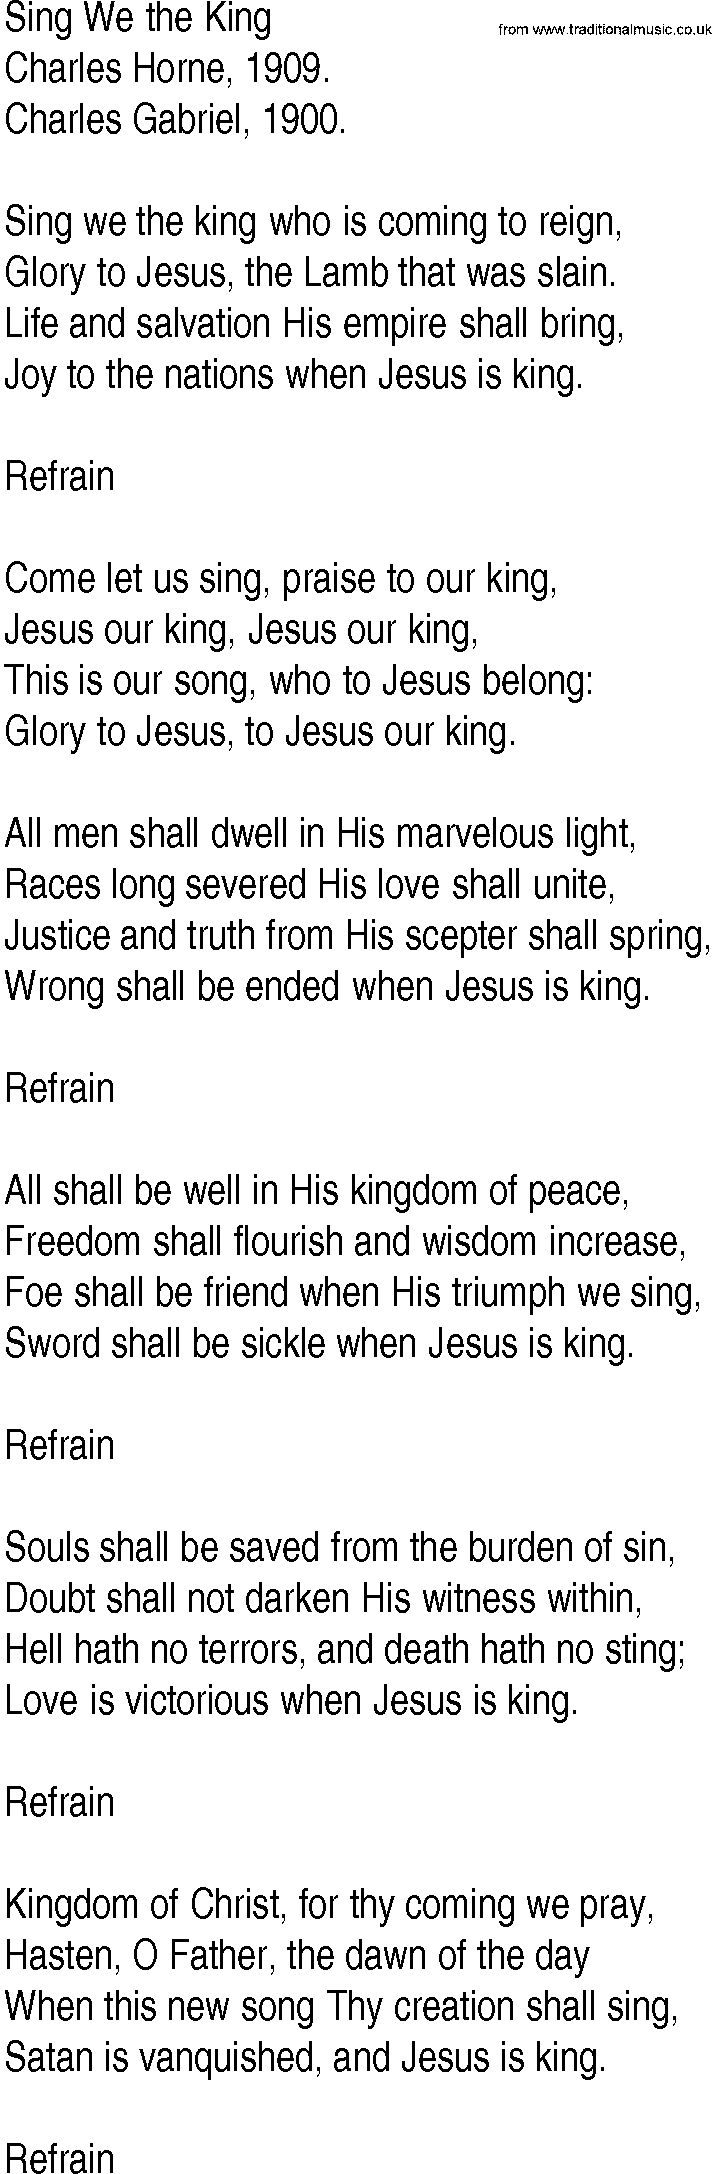 Hymn and Gospel Song: Sing We the King by Charles Horne lyrics